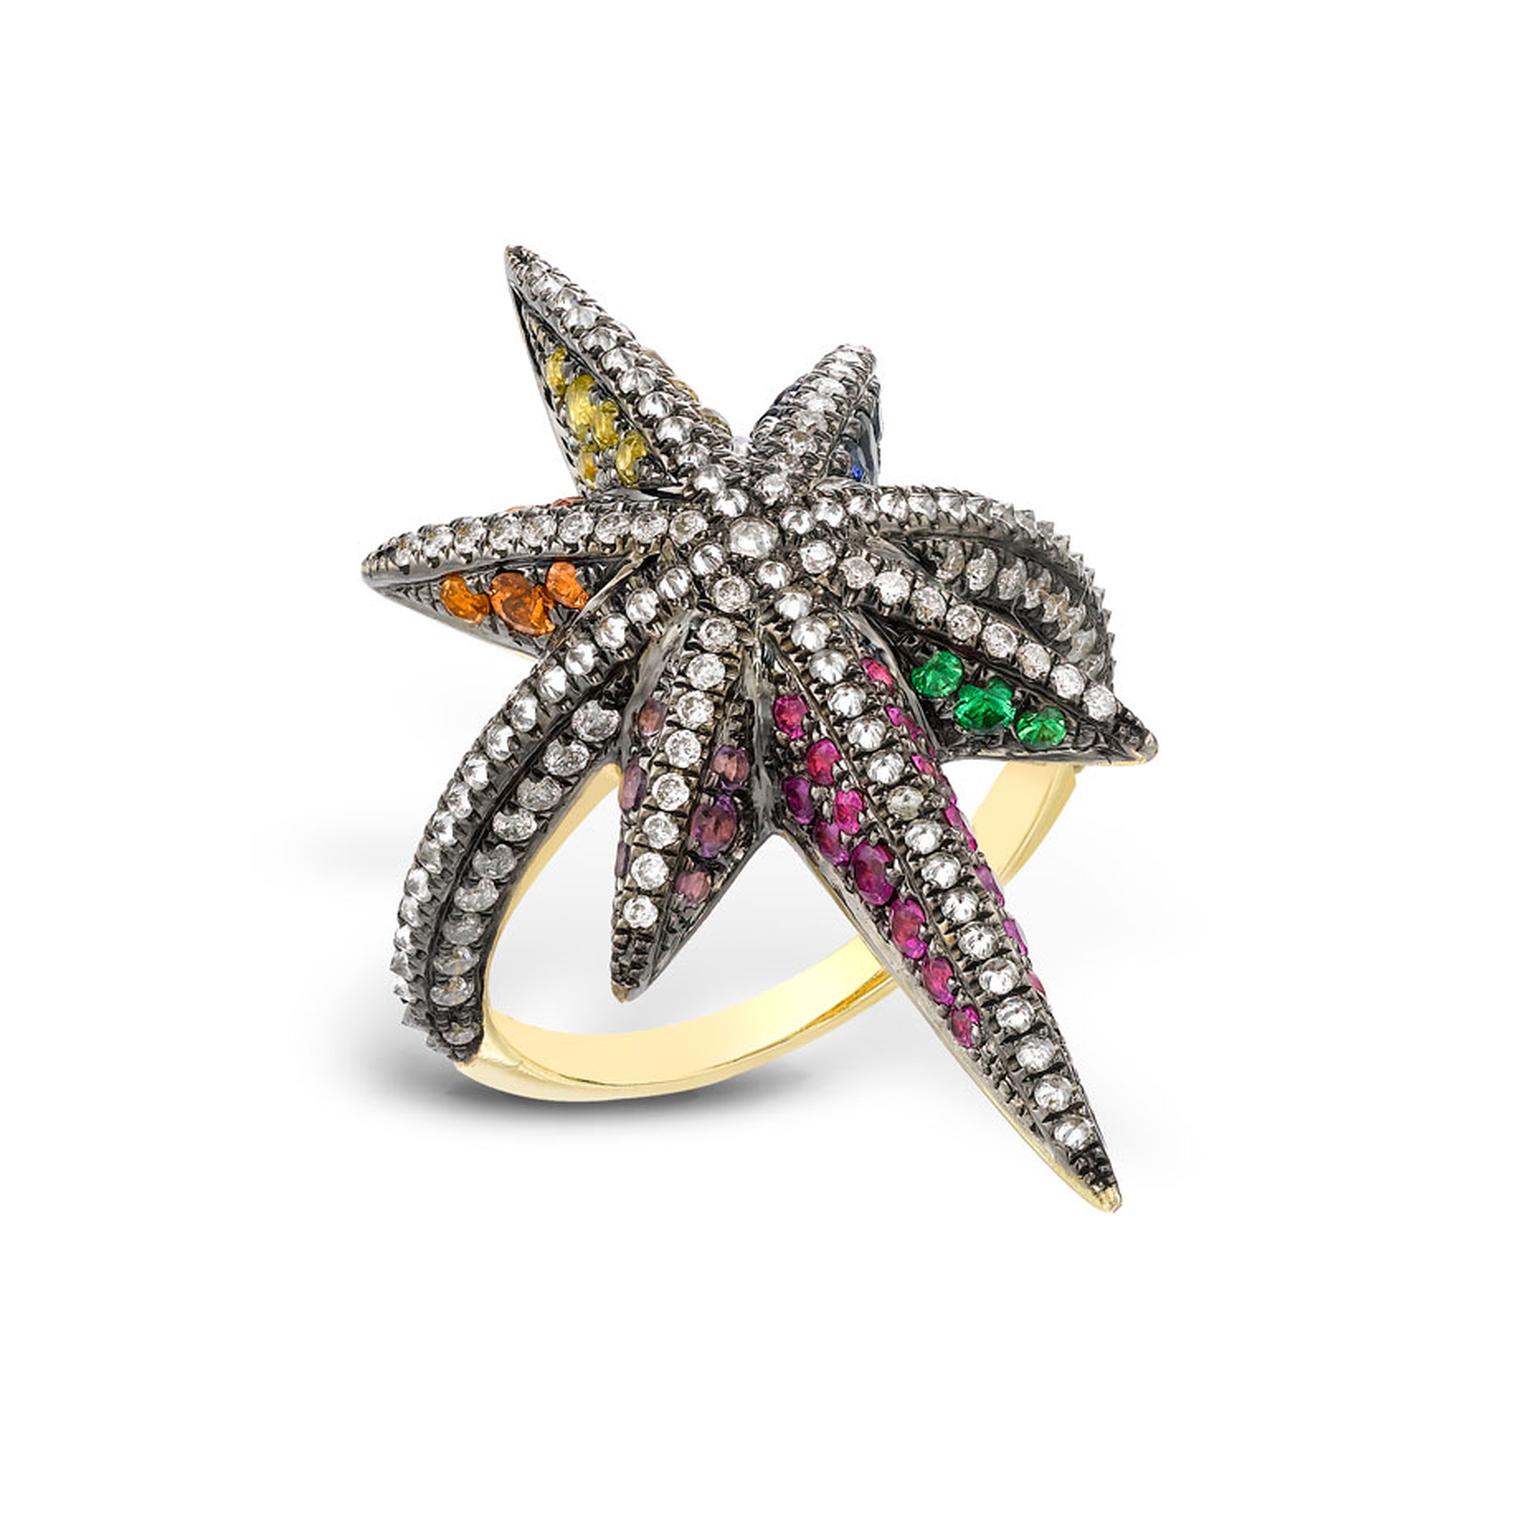 Venyx Theiya Star ring set with fancy color sapphires and diamonds.